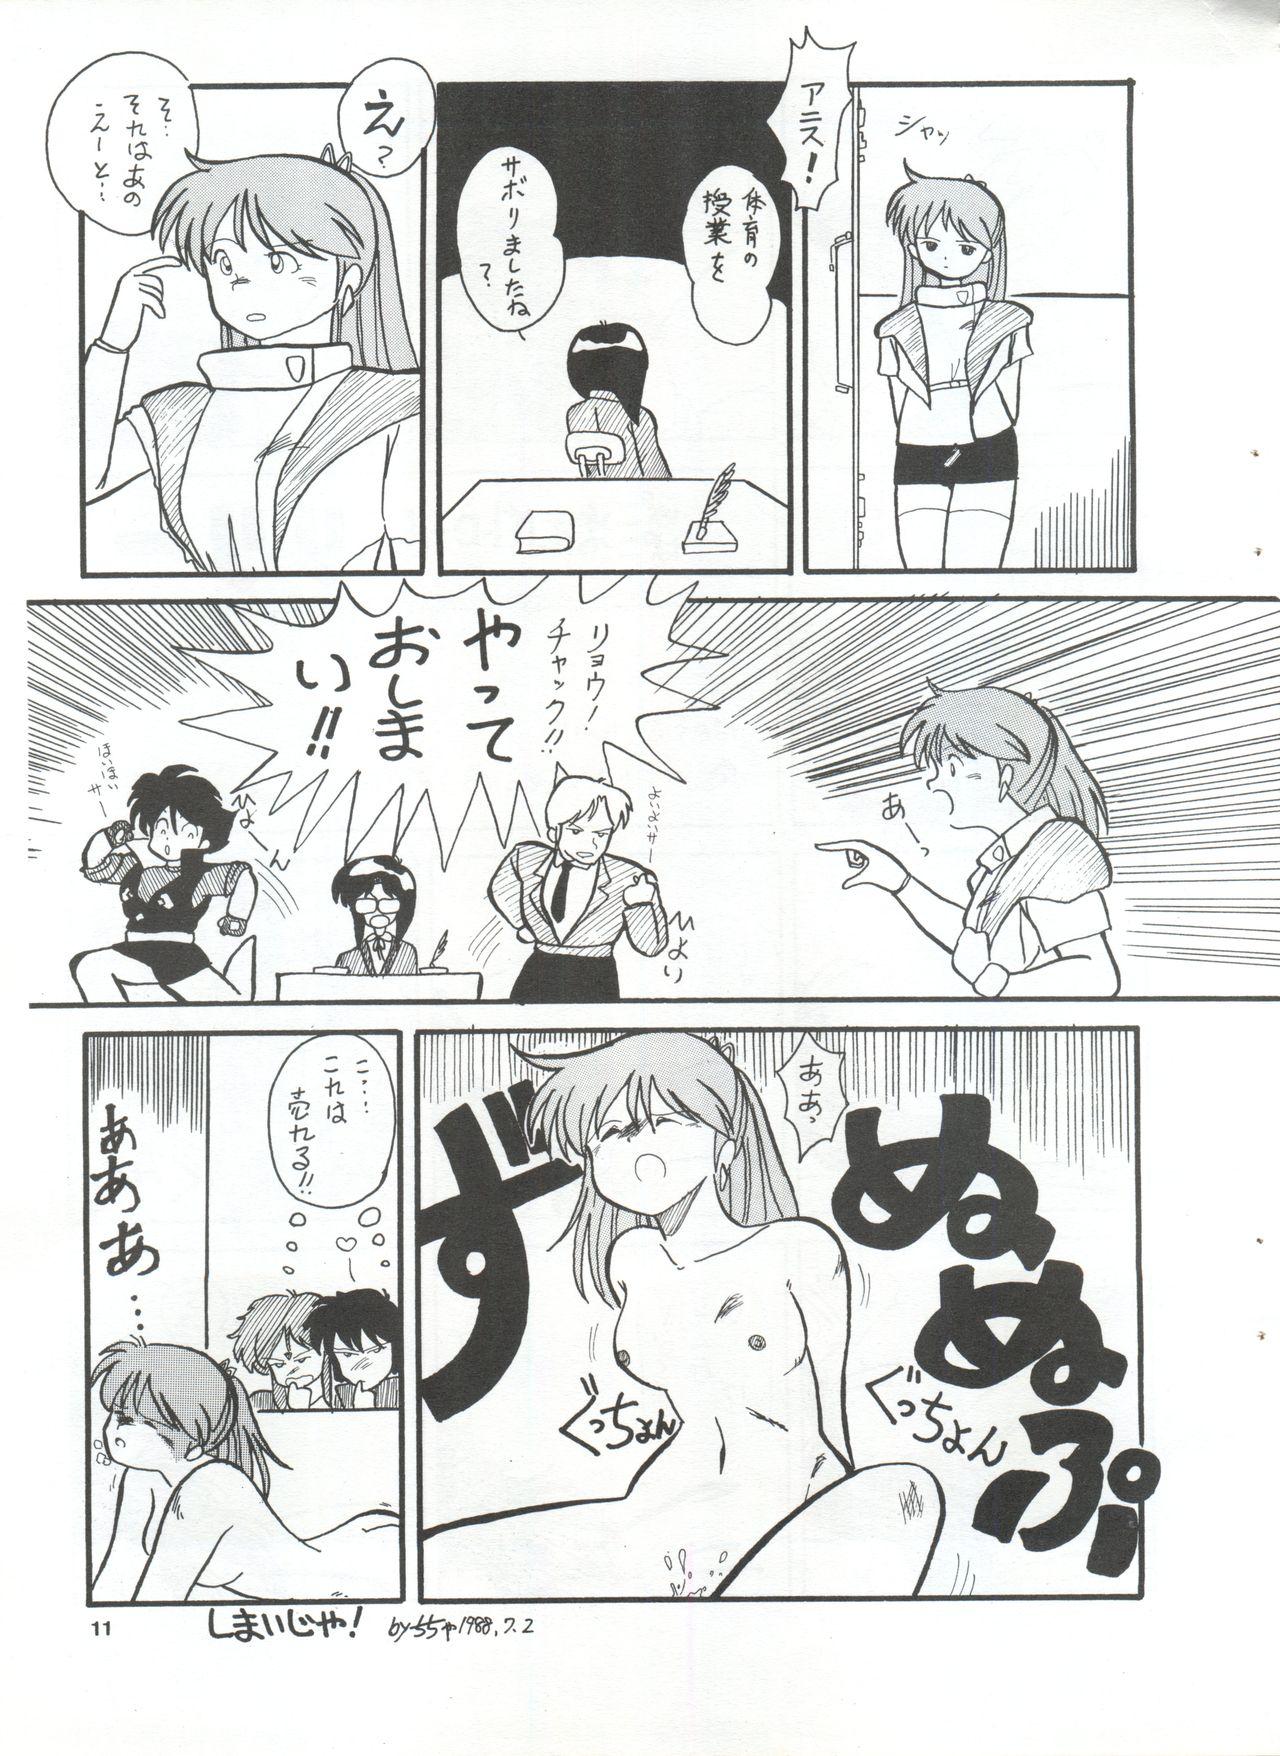 Ass Worship YATTE! YATTE! Mission 1 - Dirty pair Sonic soldier borgman Ducha - Page 10